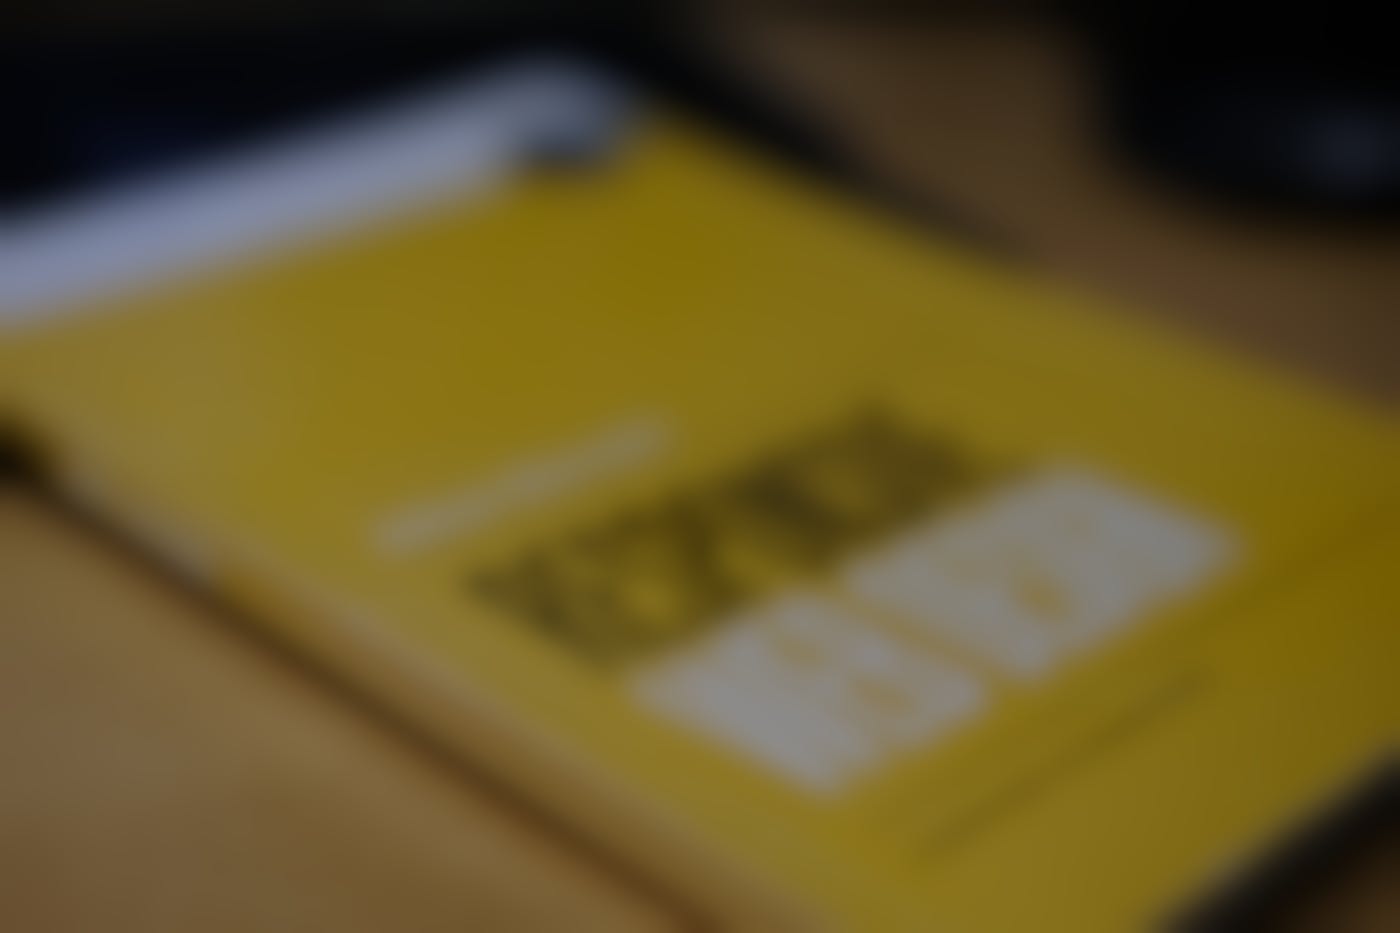 A yellow book titled Responsive Web Design